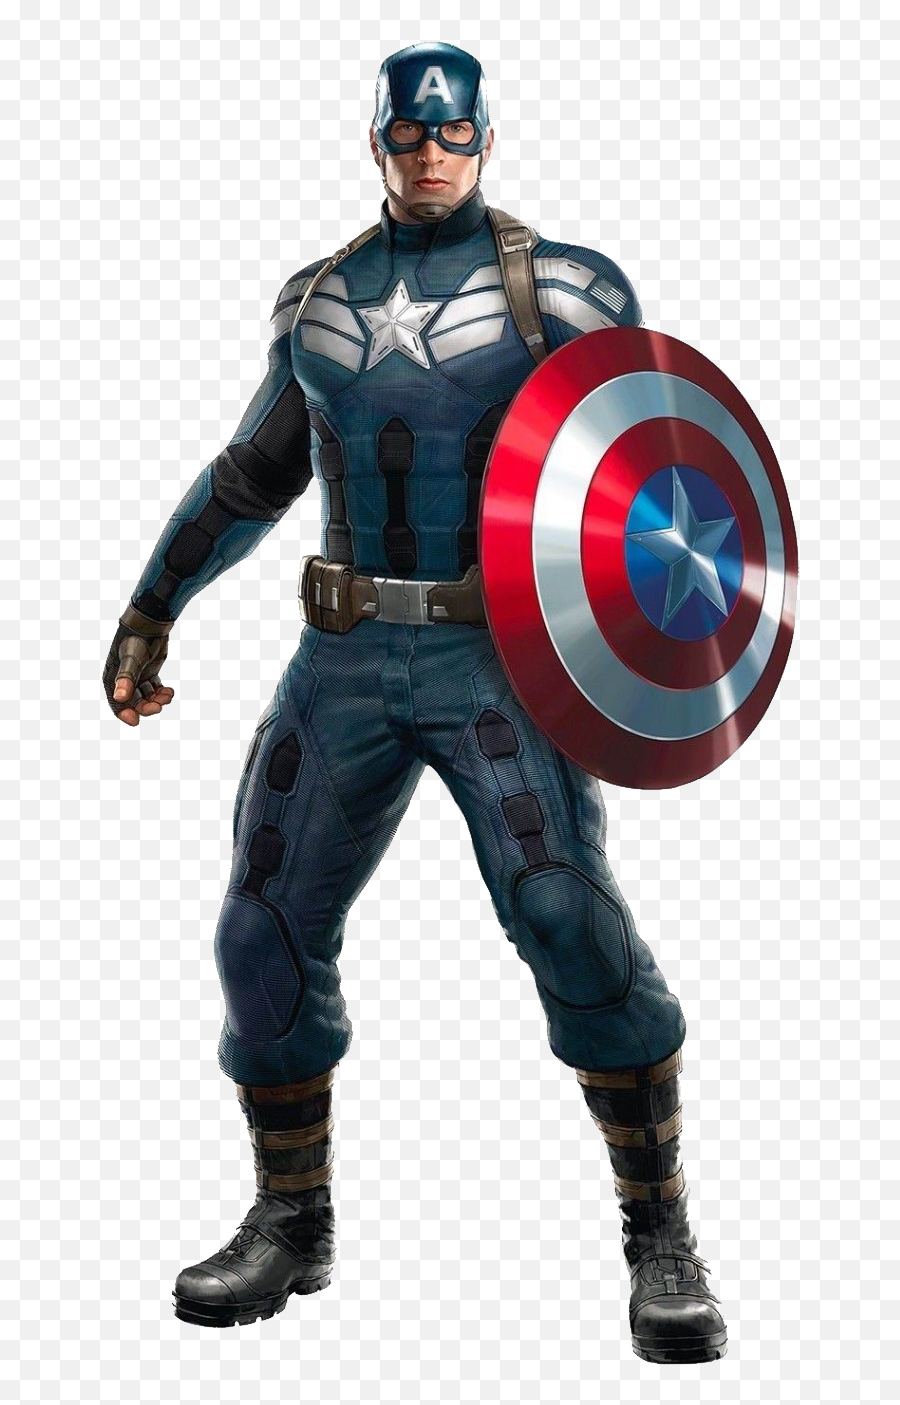 Download Captain America Png Image For Free - Captain America Png,Captain America Png